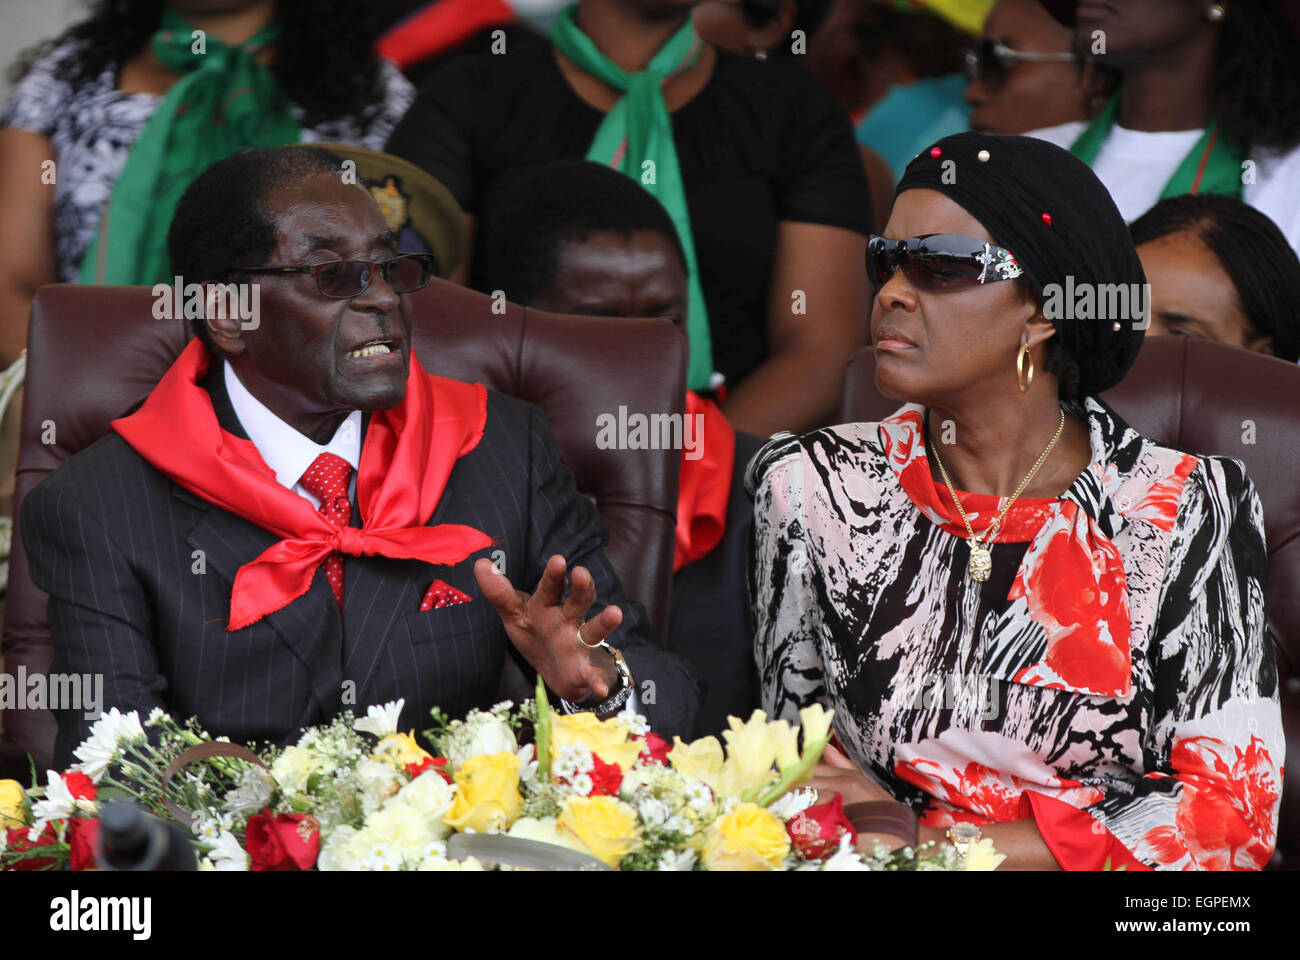 Victoria Falls, Zimbabwe. 28th February, 2015. Zimbabwean President Robert Mugabe (L) and his wife Grace Mugabe chat on the podium at a public celebration held to mark his 91st birthday in Victoria Falls, Zimbabwe, Feb. 28, 2015. Mugabe, who turns 91 this month, is the oldest leader in the world and one of the longest-serving African statesmen. Having ruled Zimbabwe for 35 years since independence, Mugabe was endorsed by the ruling ZANU-PF party as the sole candidate to contest at the age of 94 in the next presidential election in 2018. Credit:  Xinhua/Alamy Live News Stock Photo